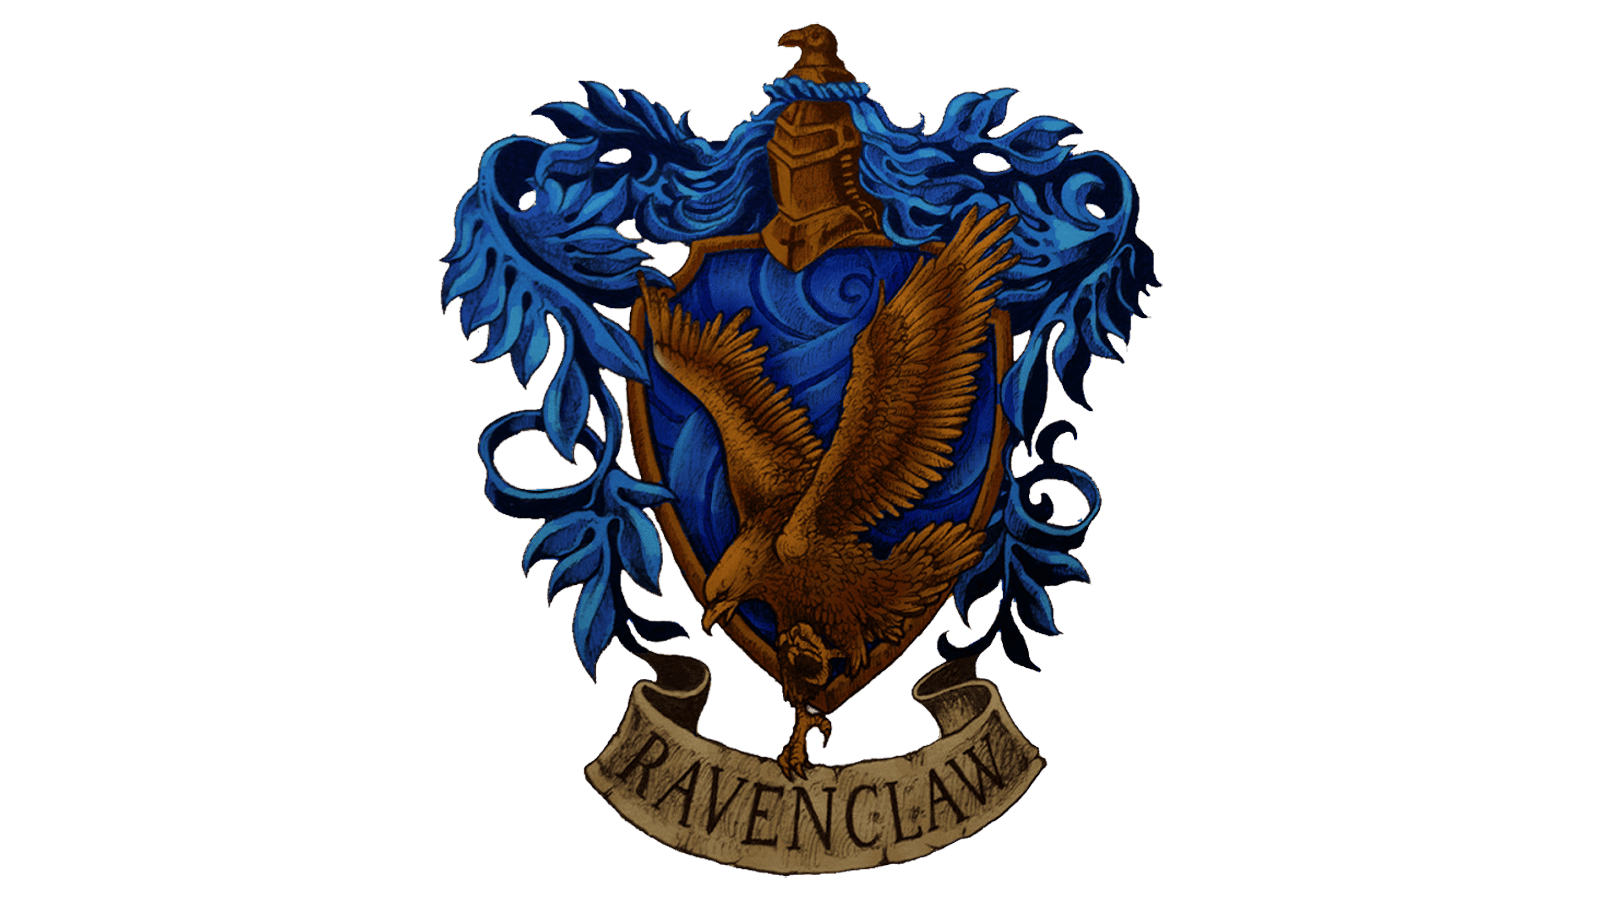 What Is Ravenclaw's Mascot in Harry Potter?